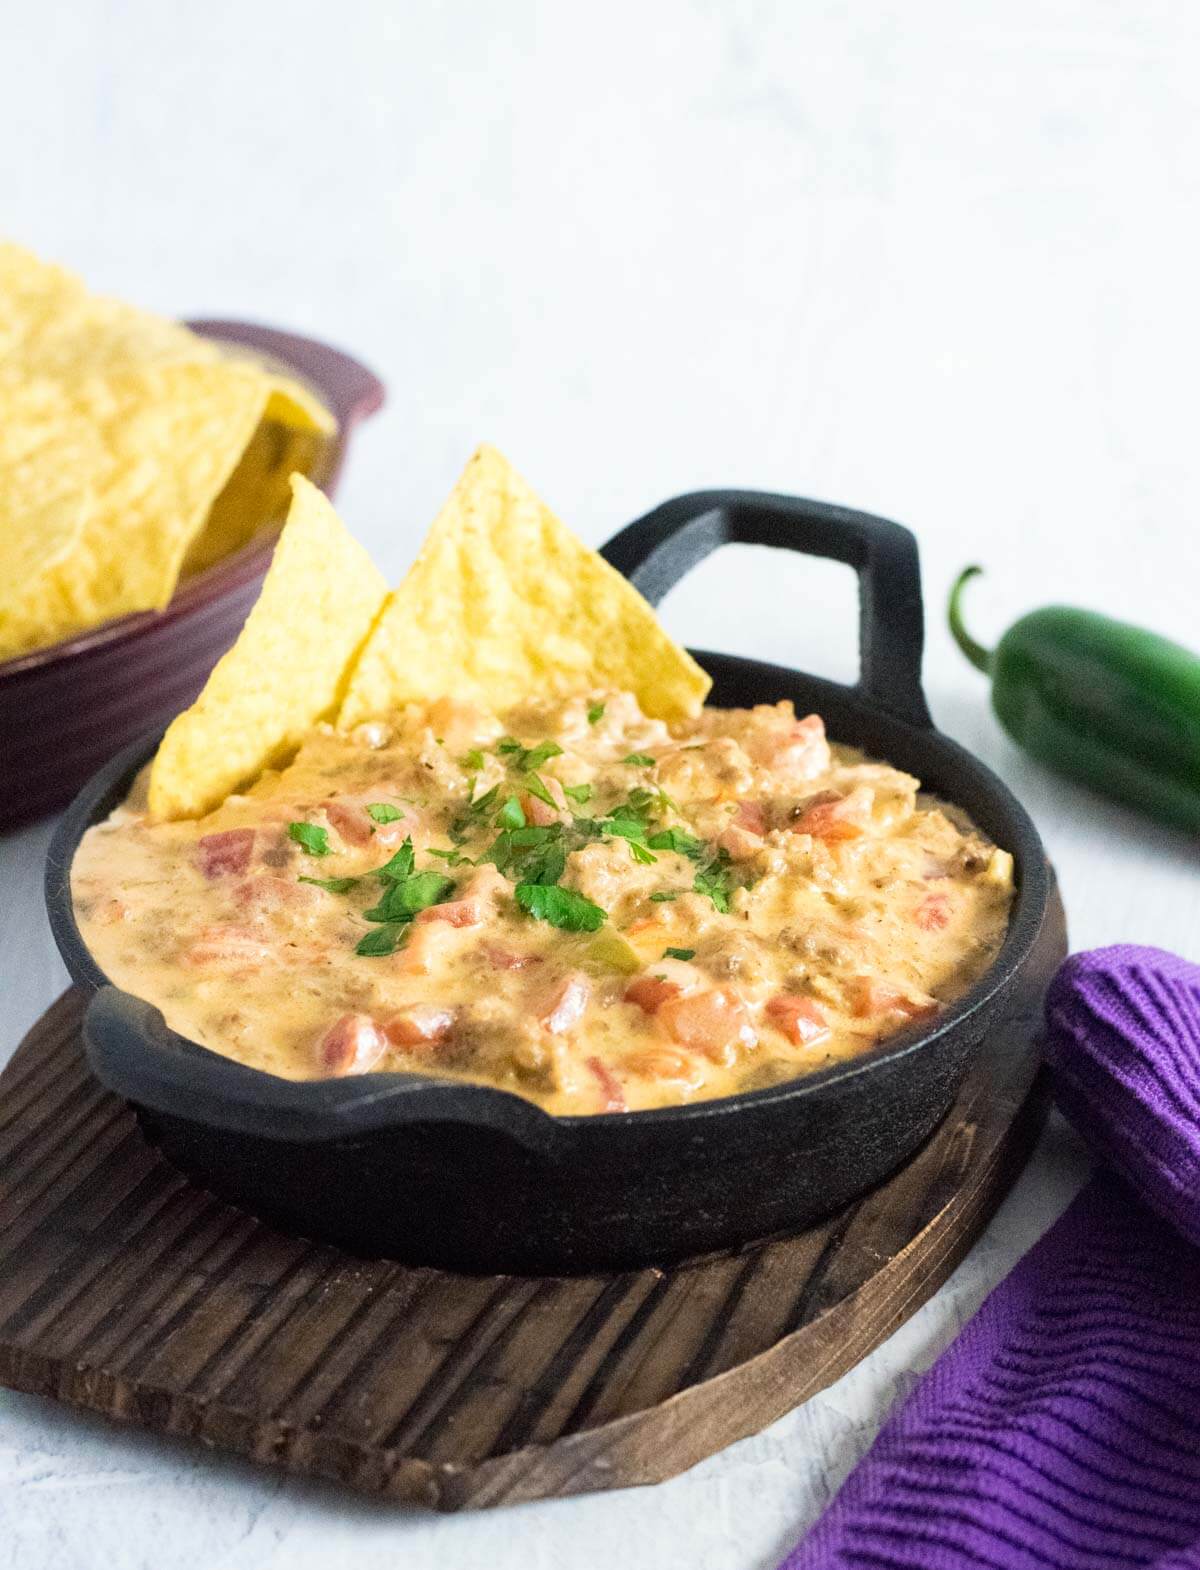 Serving sausage queso dip with tortilla chips.